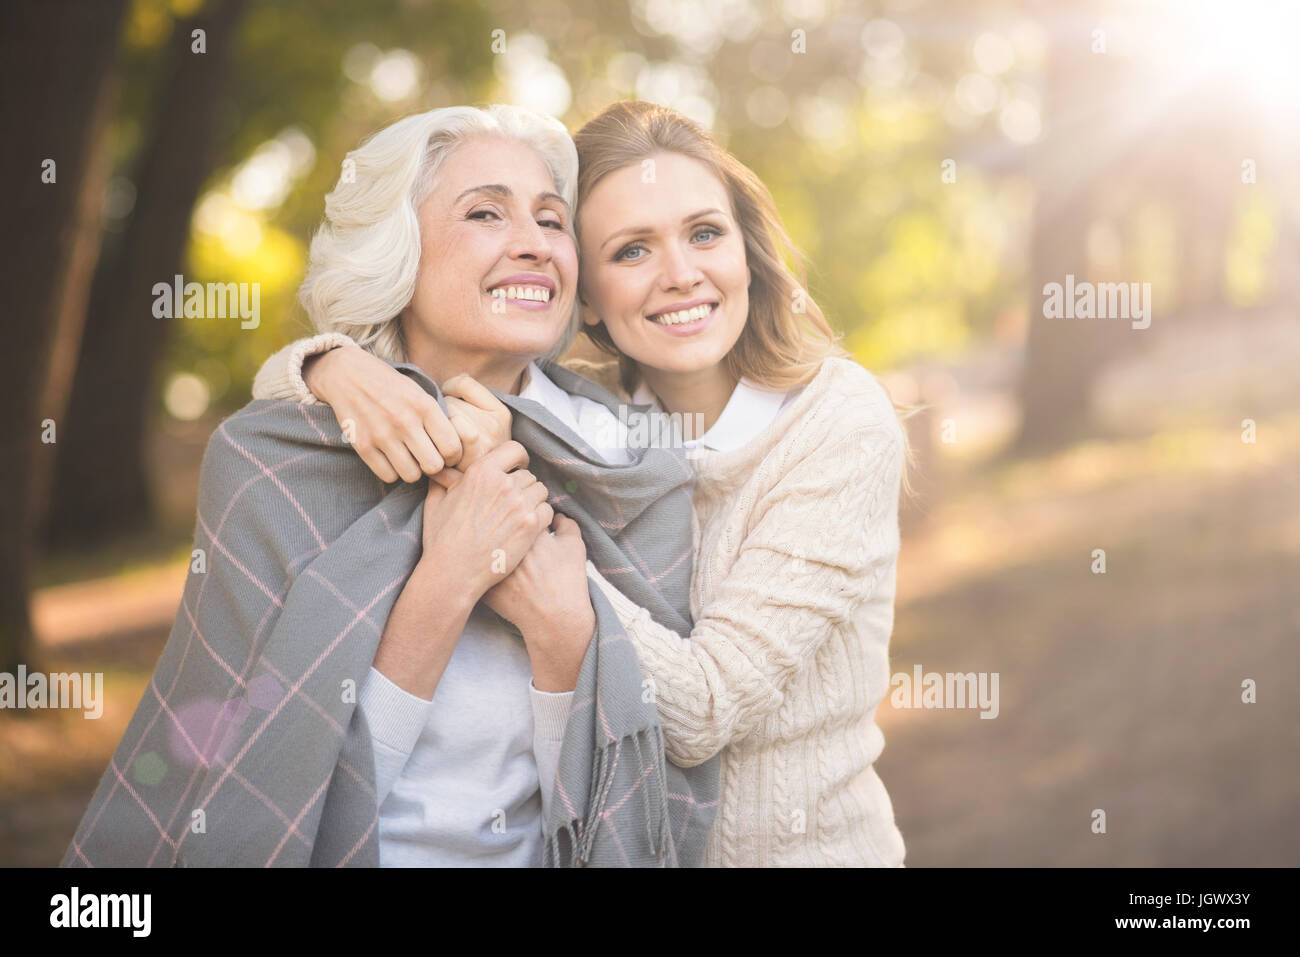 Cherishing family picnic. Mature amused smiling woman enjoying picnic and expressing joy while covering with blanket and hugging aged parent Stock Photo